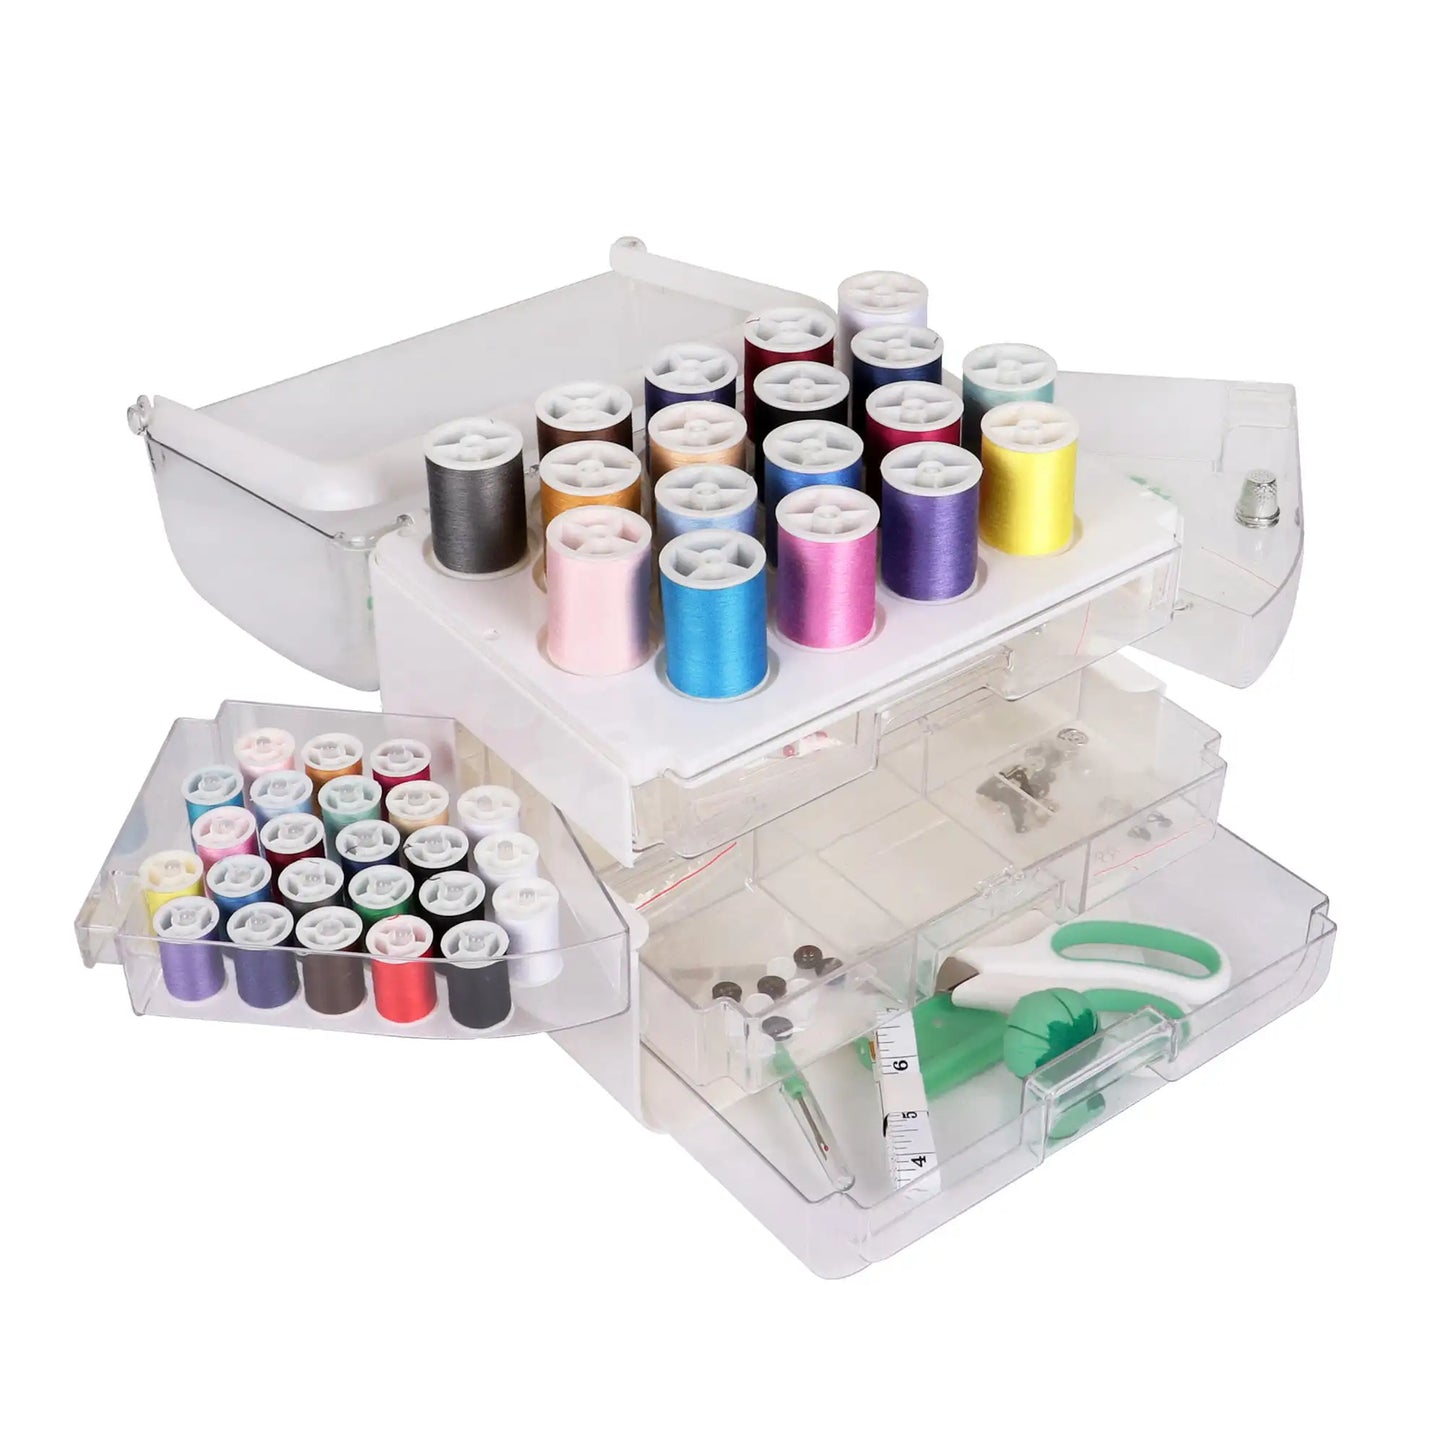 224 Pcs Embroidery Thread Organizer for Home